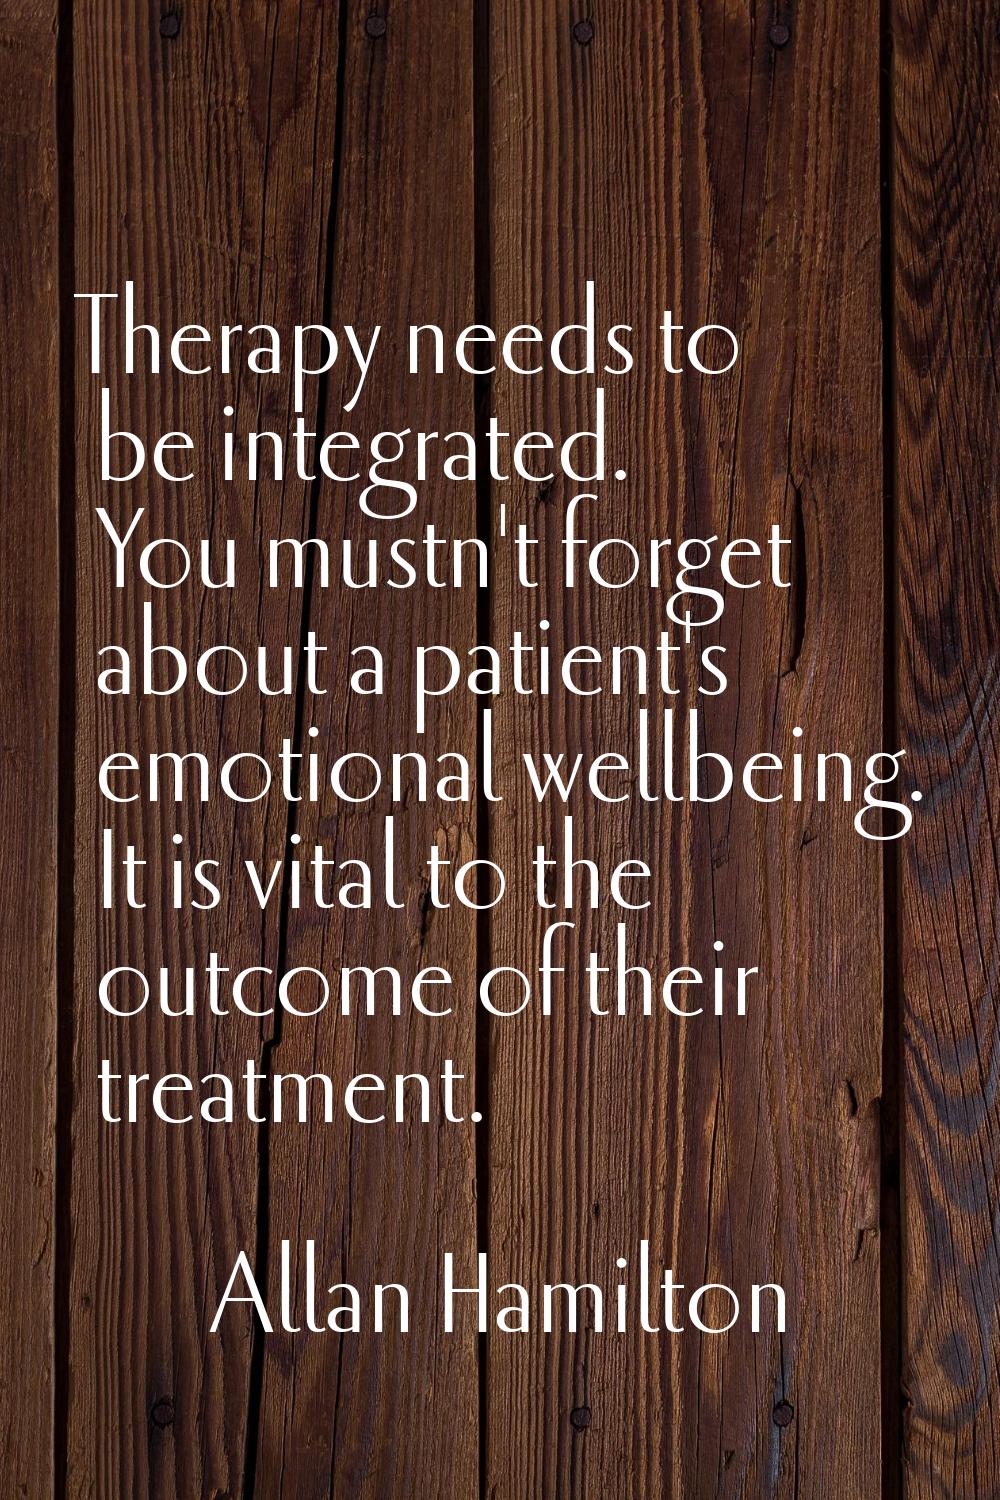 Therapy needs to be integrated. You mustn't forget about a patient's emotional wellbeing. It is vit